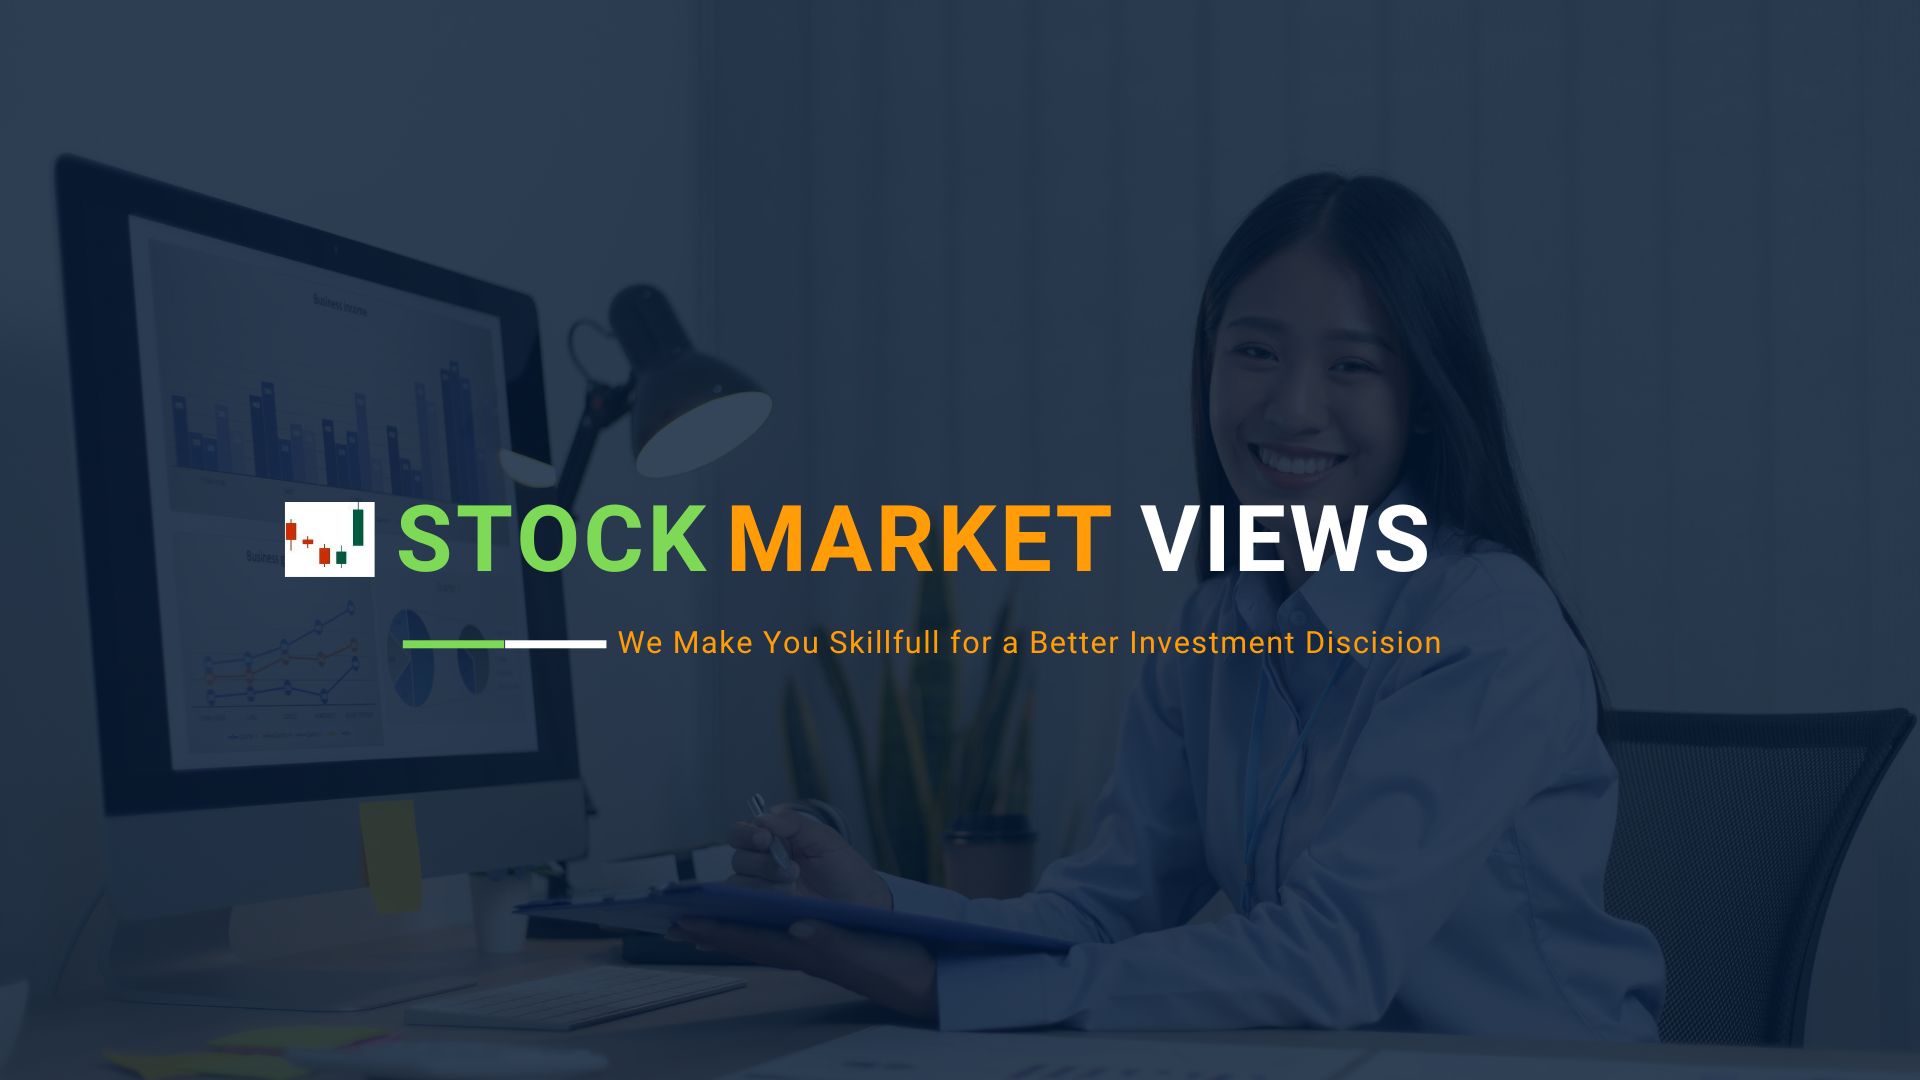 Stockmarketviews.in home page